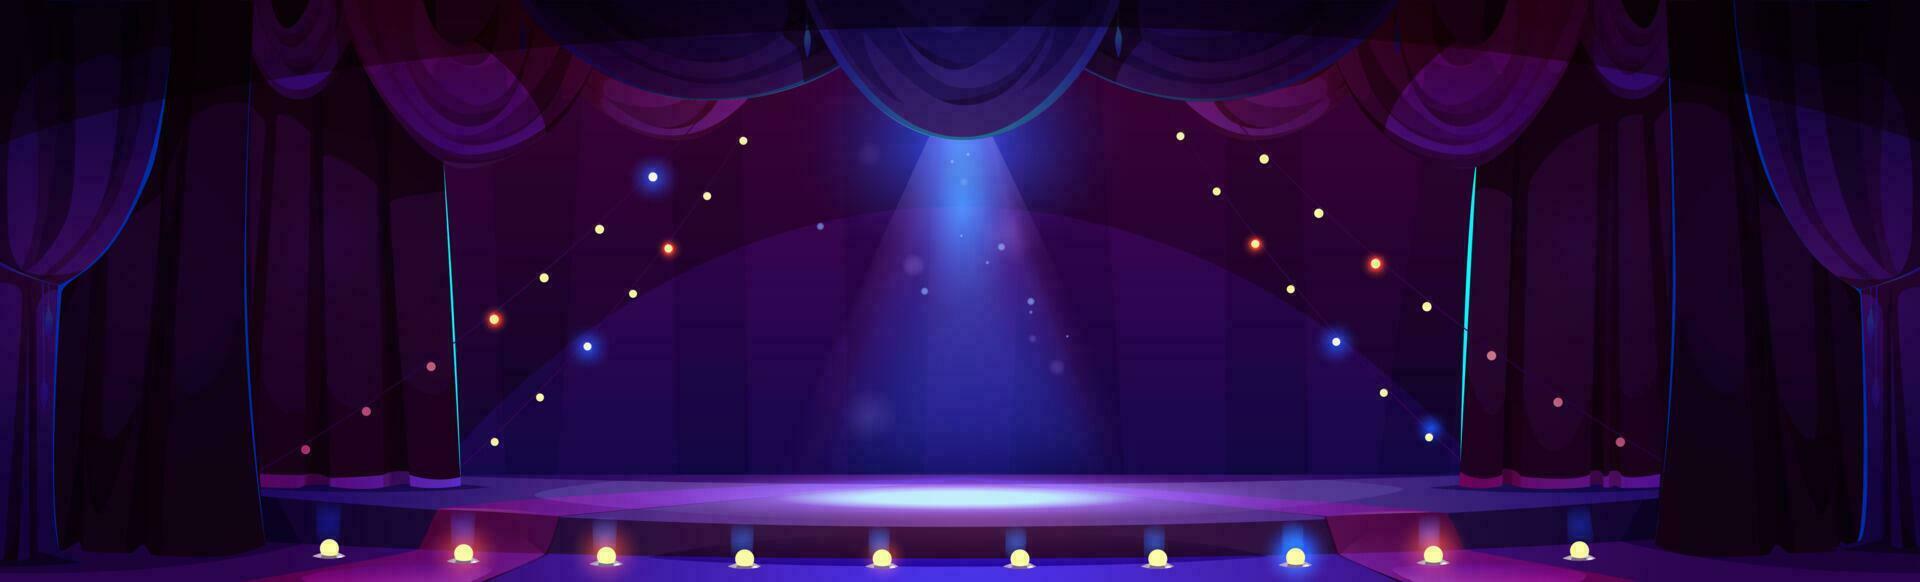 Cartoon circus stage night arena with curtain vector